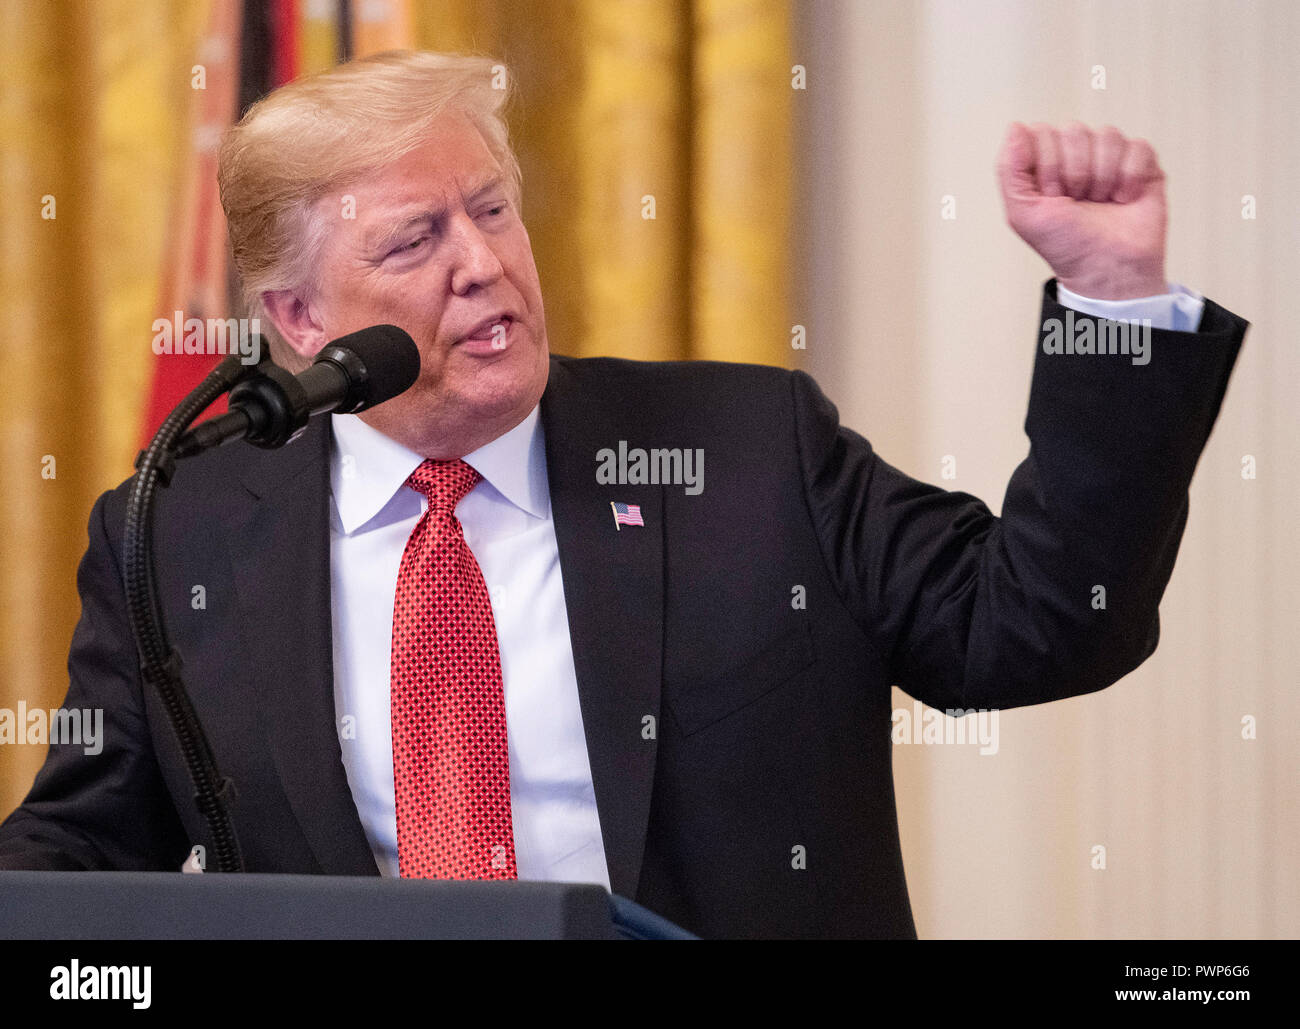 Washington, USA. 17th Oct 2018. United States President Donald J. Trump makes remarks as he awards the Medal of Honor to Sergeant Major John L. Canley, United States Marine Corps (Retired), for conspicuous gallantry during the Vietnam War in a ceremony in the East Room of the the White House in Washington, DC on Wednesday, October 17, 2018. Credit: Ron Sachs/CNP/MediaPunch Credit: MediaPunch Inc/Alamy Live News Stock Photo